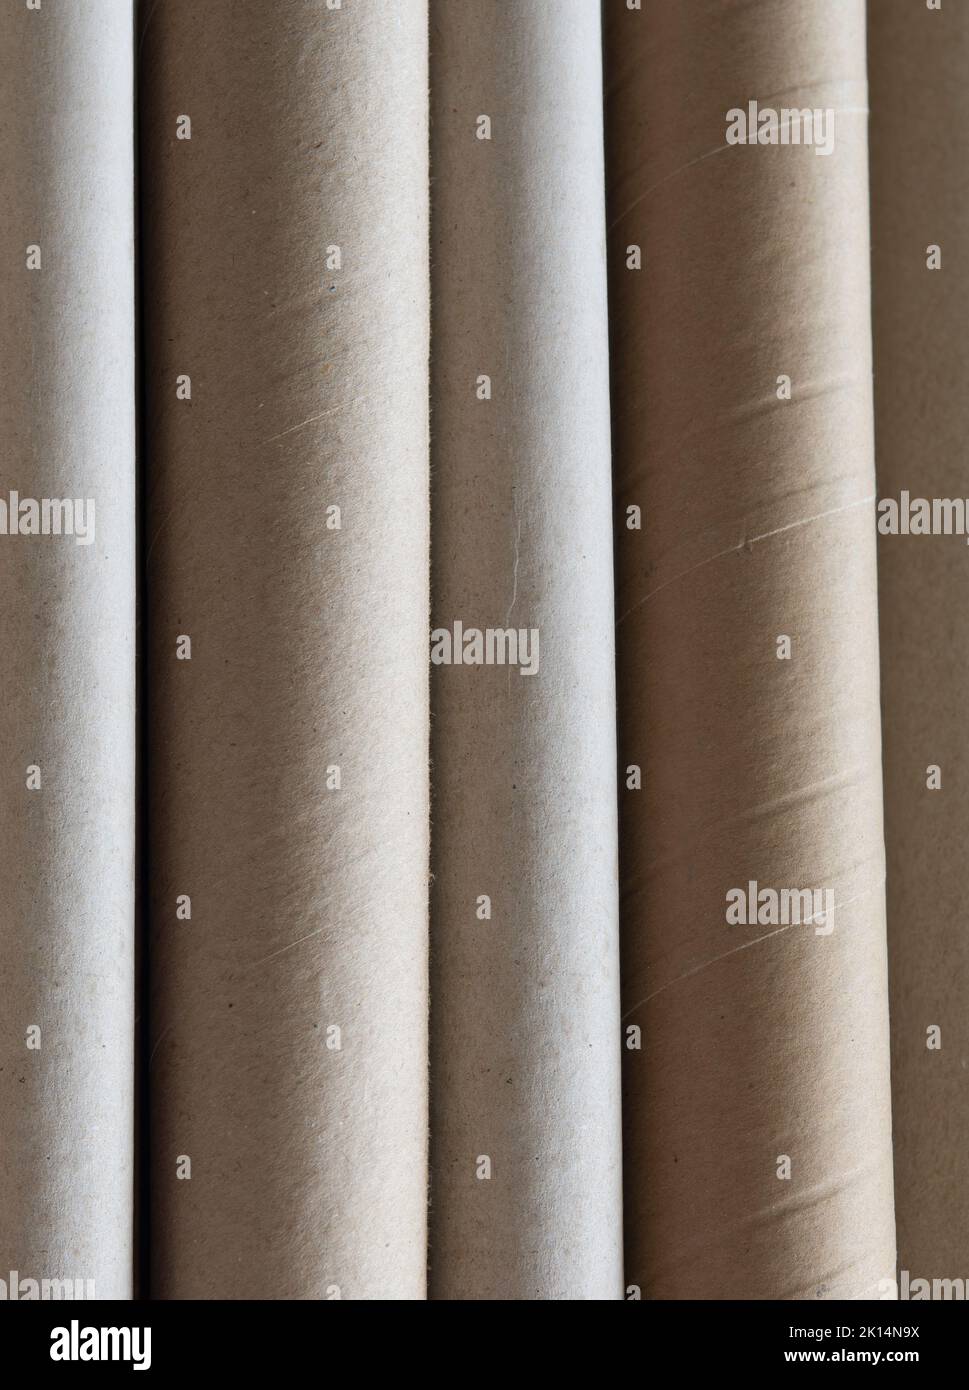 Vertical view of large Cardboard Tubing Stock Photo